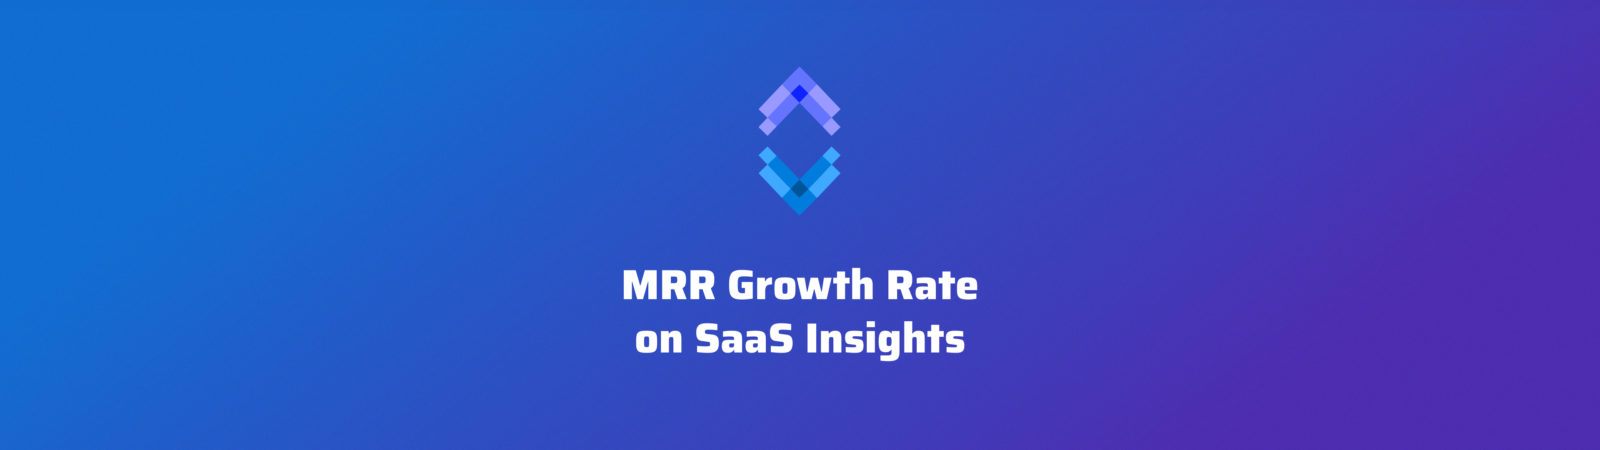 mrr growth rate